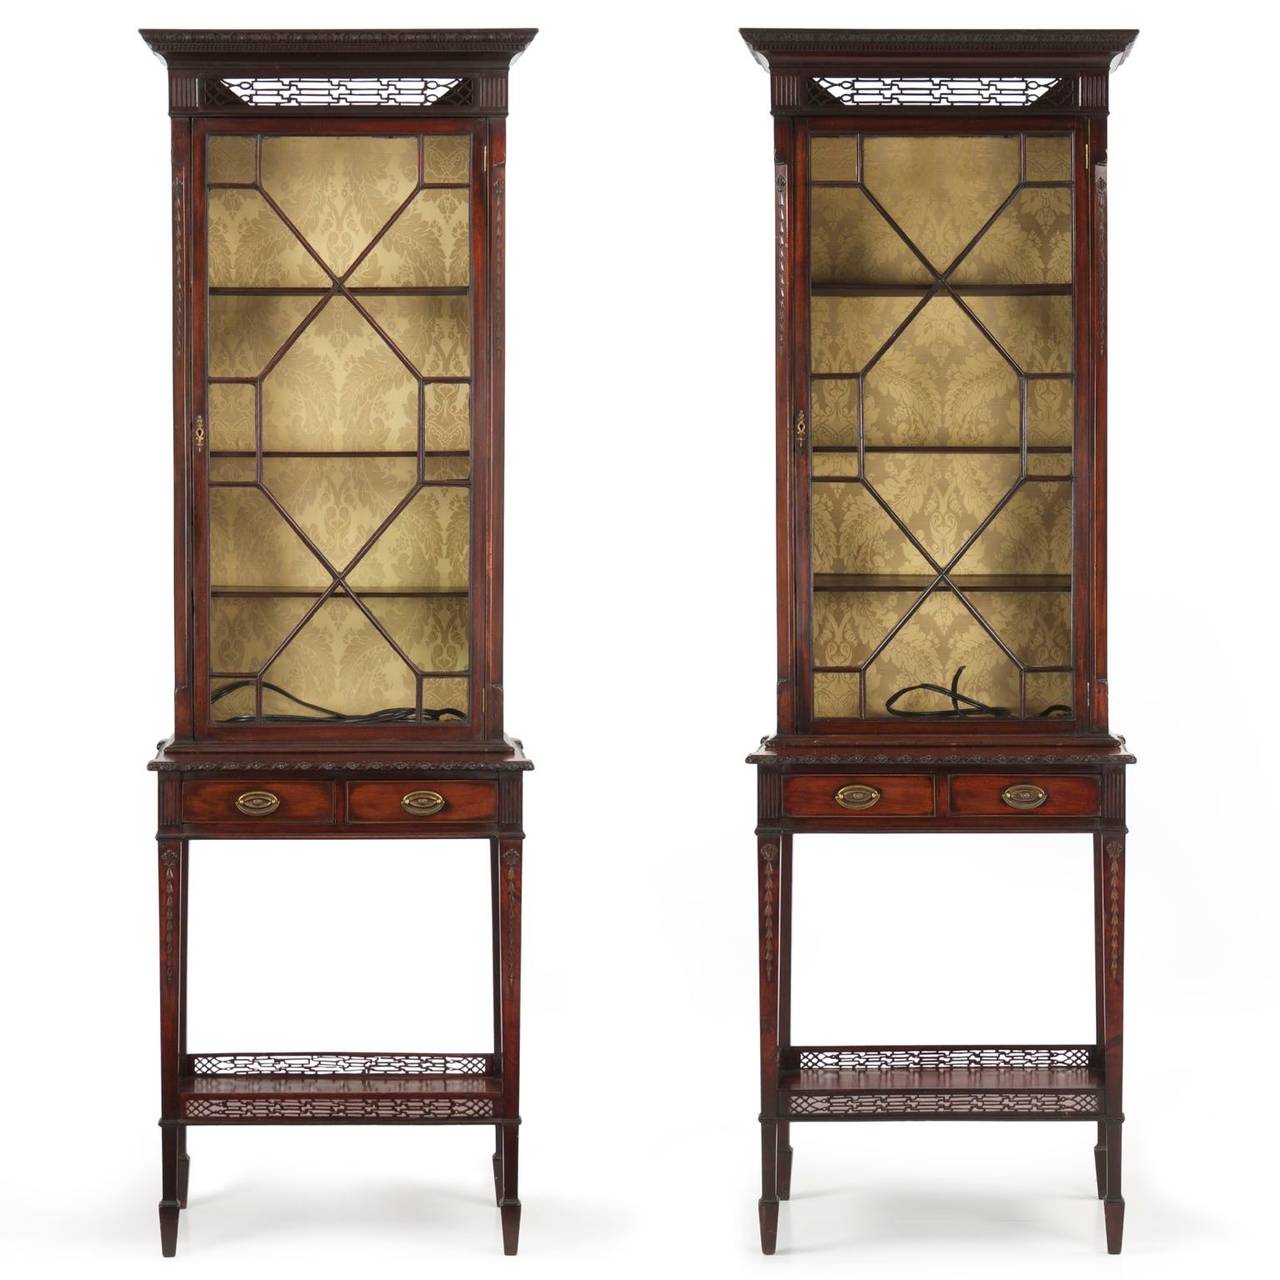 A rare and stunningly beautiful pair of curio cabinets originating from England in the last quarter of the 19th Century, the quality and execution of the cabinets is simply of the highest level.  They are crafted in two parts, the upper resting